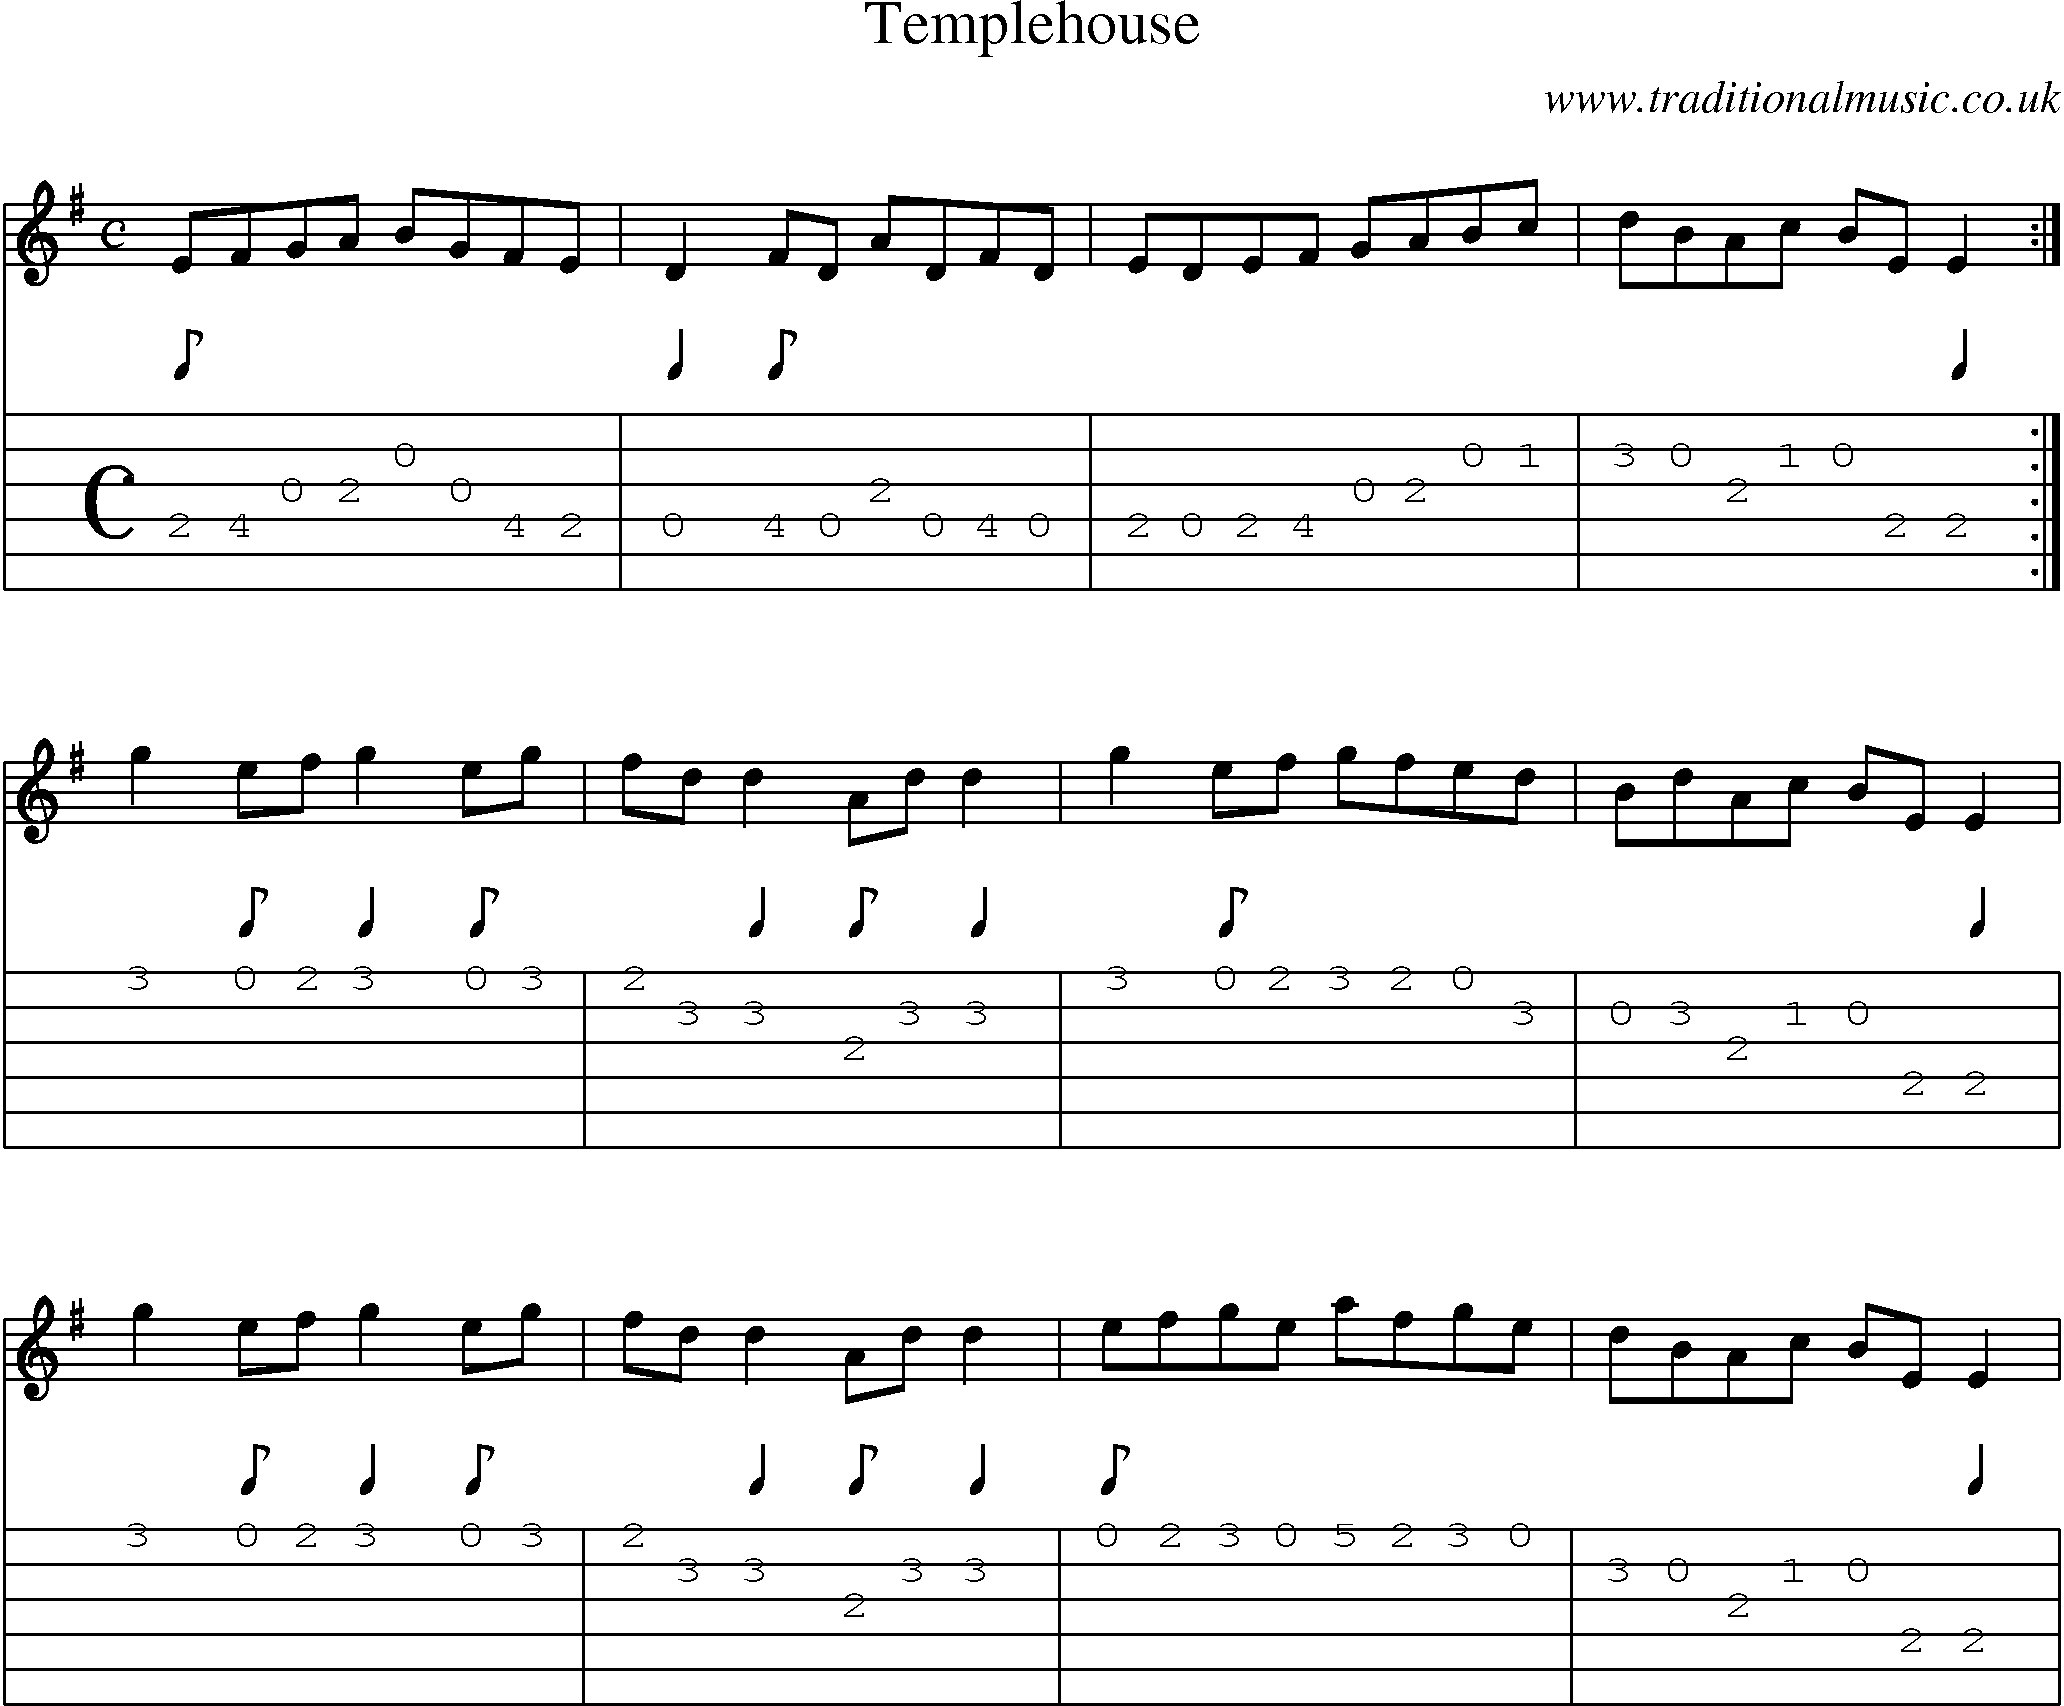 Music Score and Guitar Tabs for Templehouse